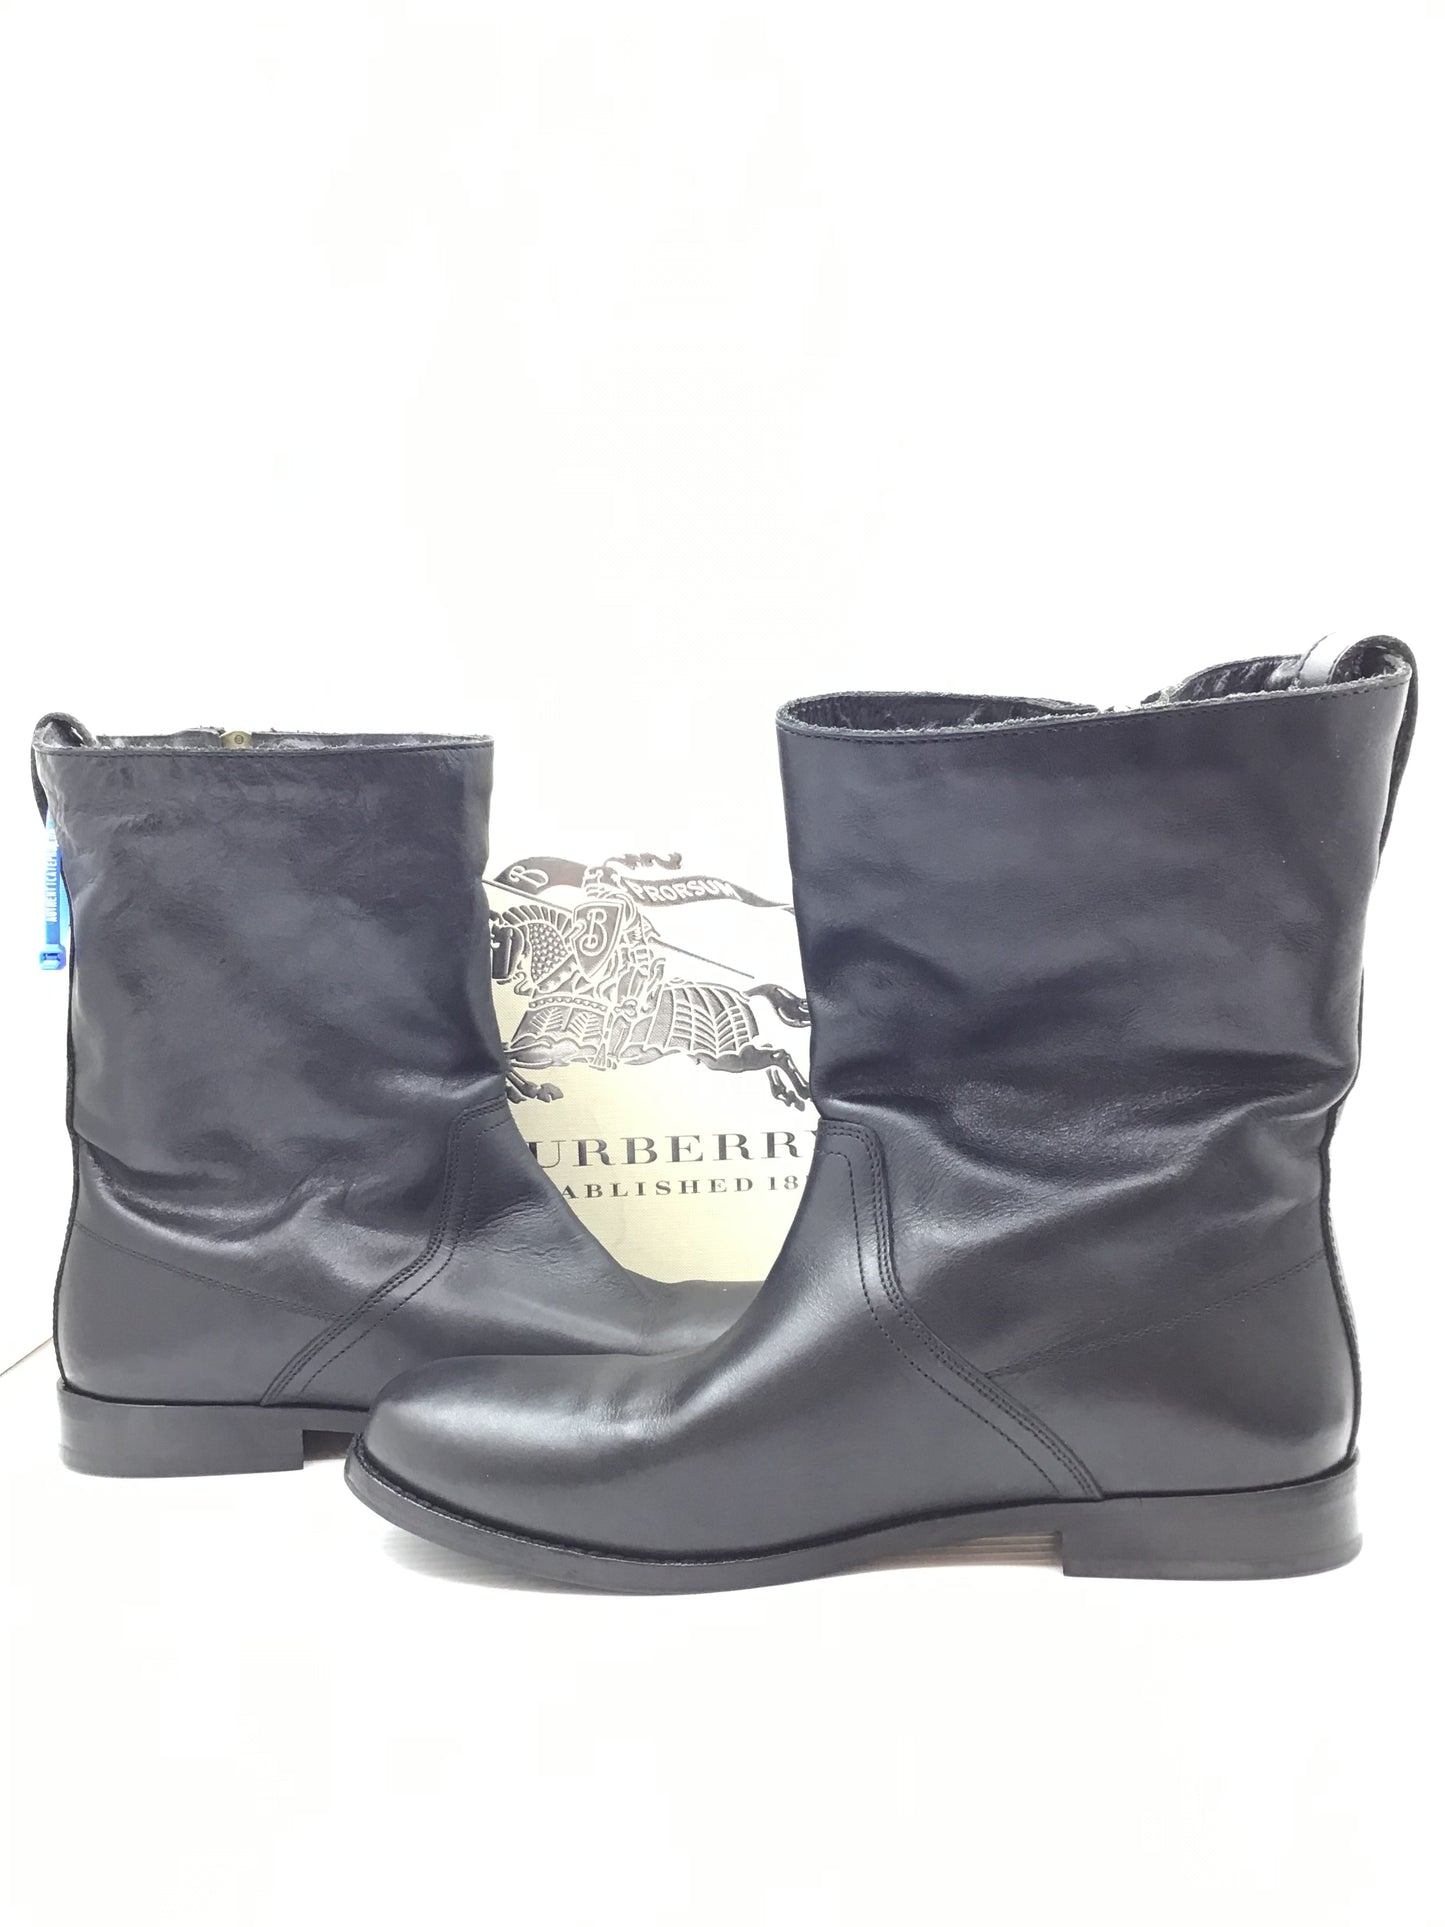 Boots Designer By Burberry  Size: 10